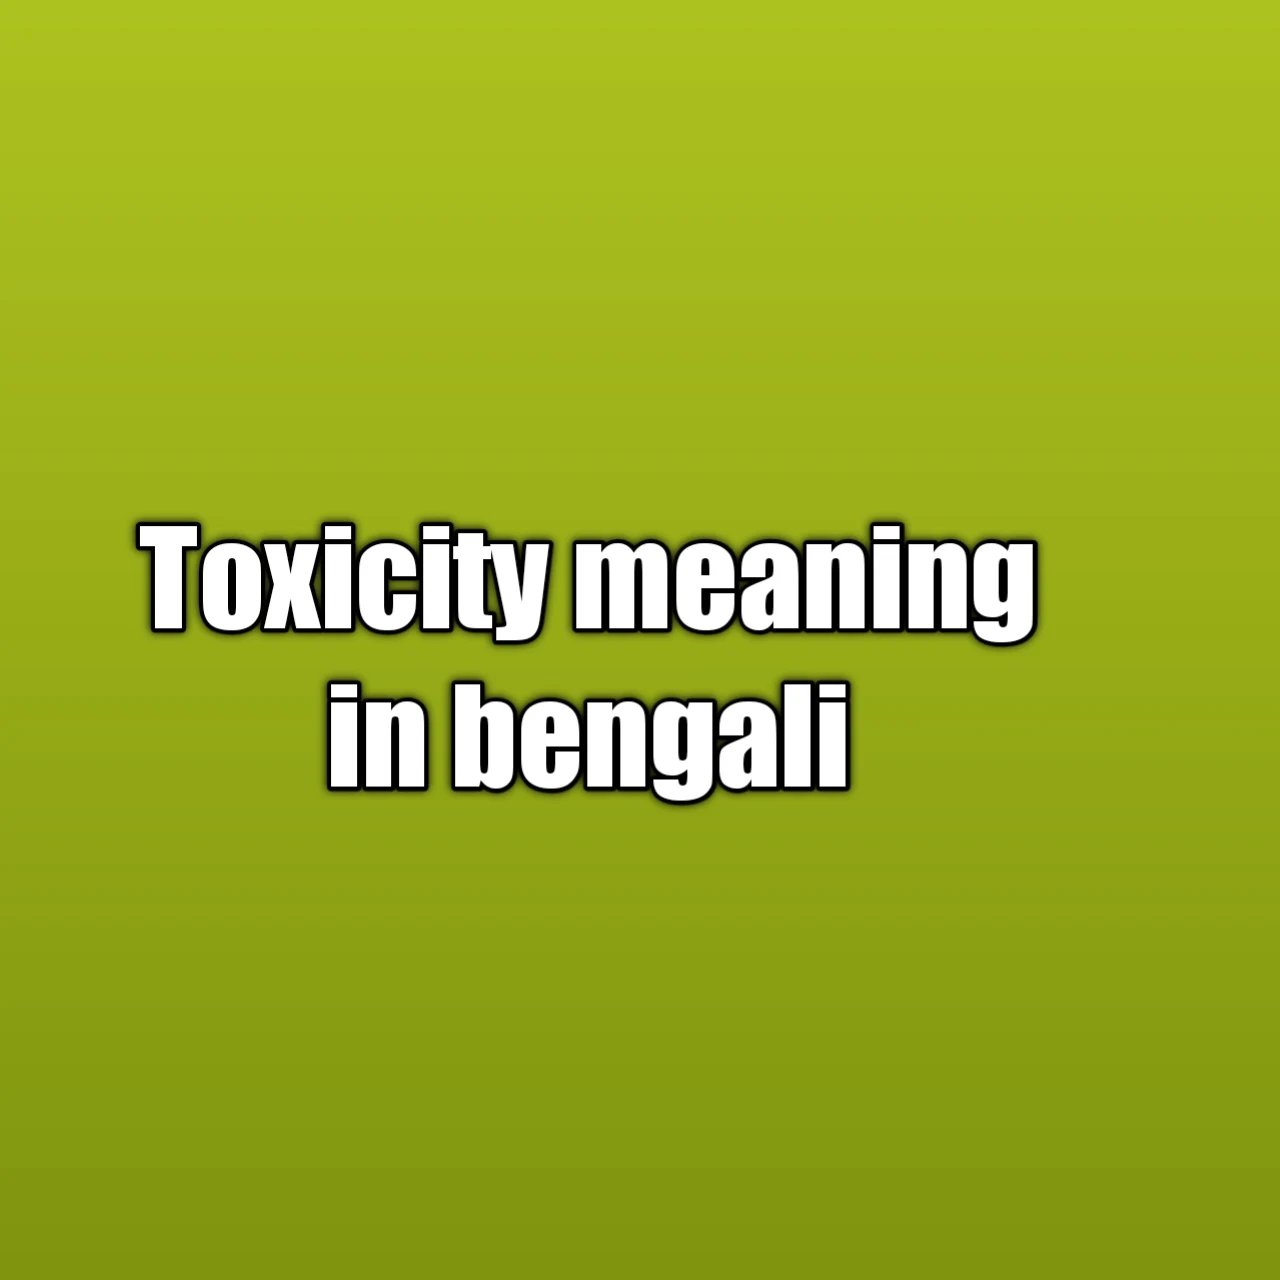 toxicity meaning in bengali